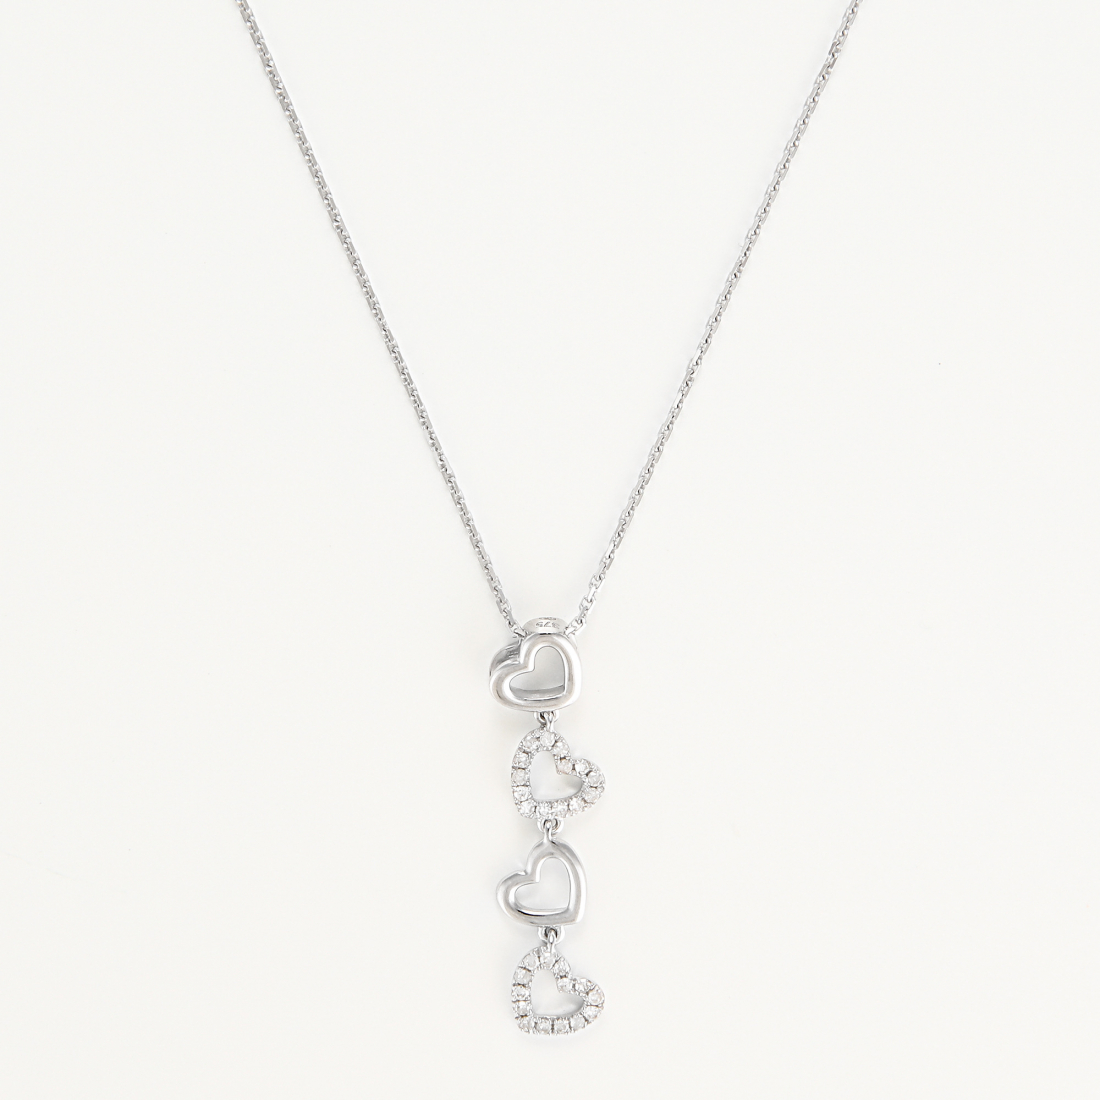 Women's '4 coeurs' Pendant with chain